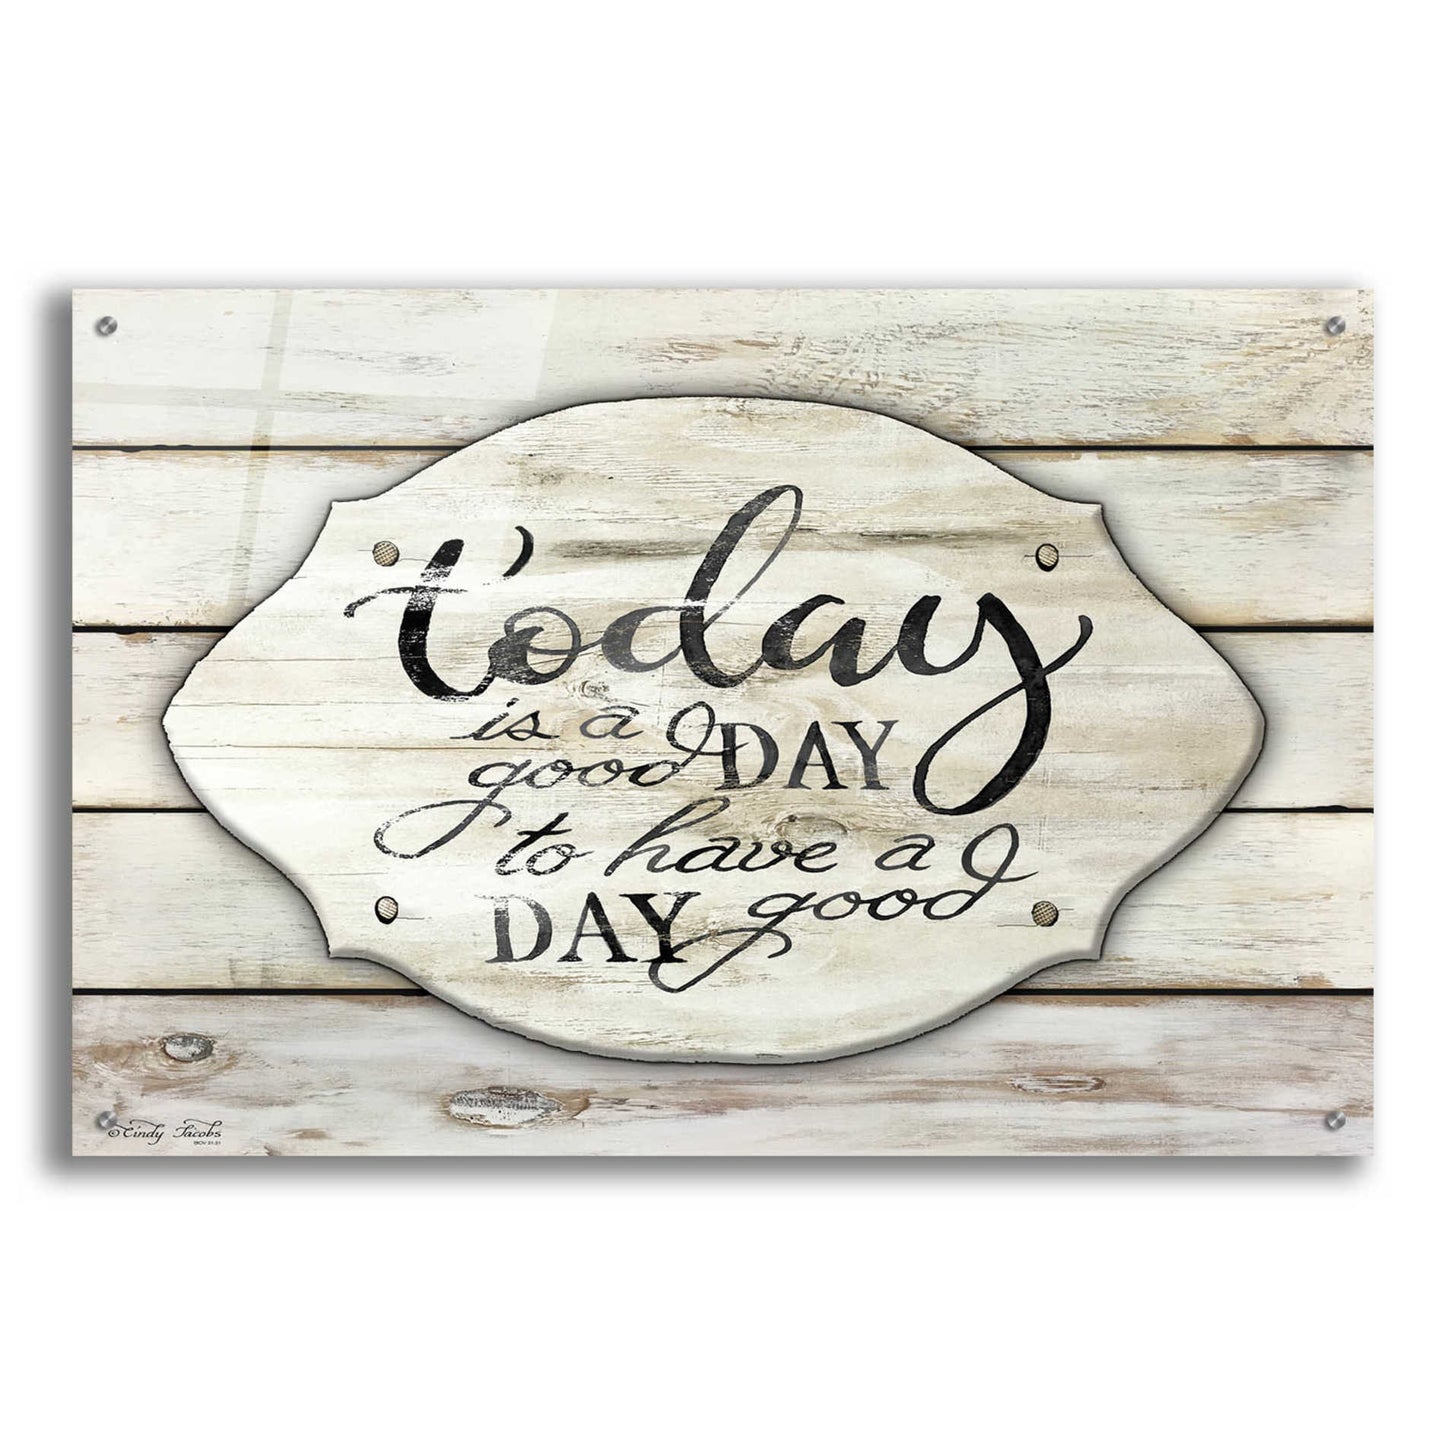 Epic Art 'Today is a Good Day' by Cindy Jacobs, Acrylic Glass Wall Art,36x24